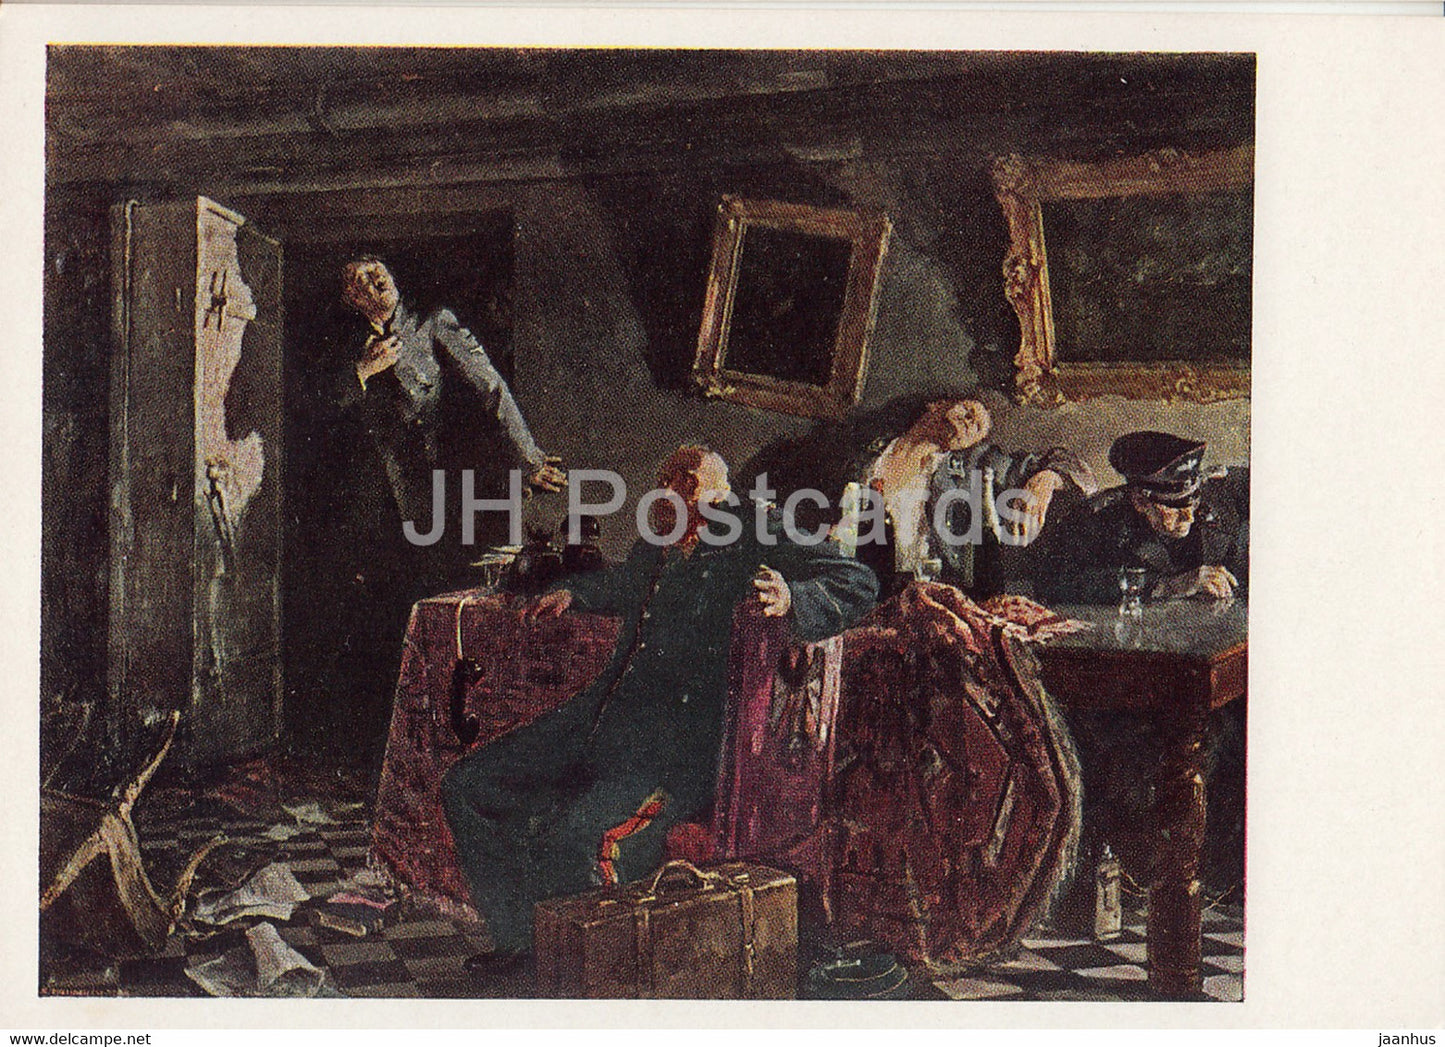 painting by Kukryniksy - The End - Reich Chancellery bunker - Hitler - Russian art - 1965 - Russia USSR - unused - JH Postcards